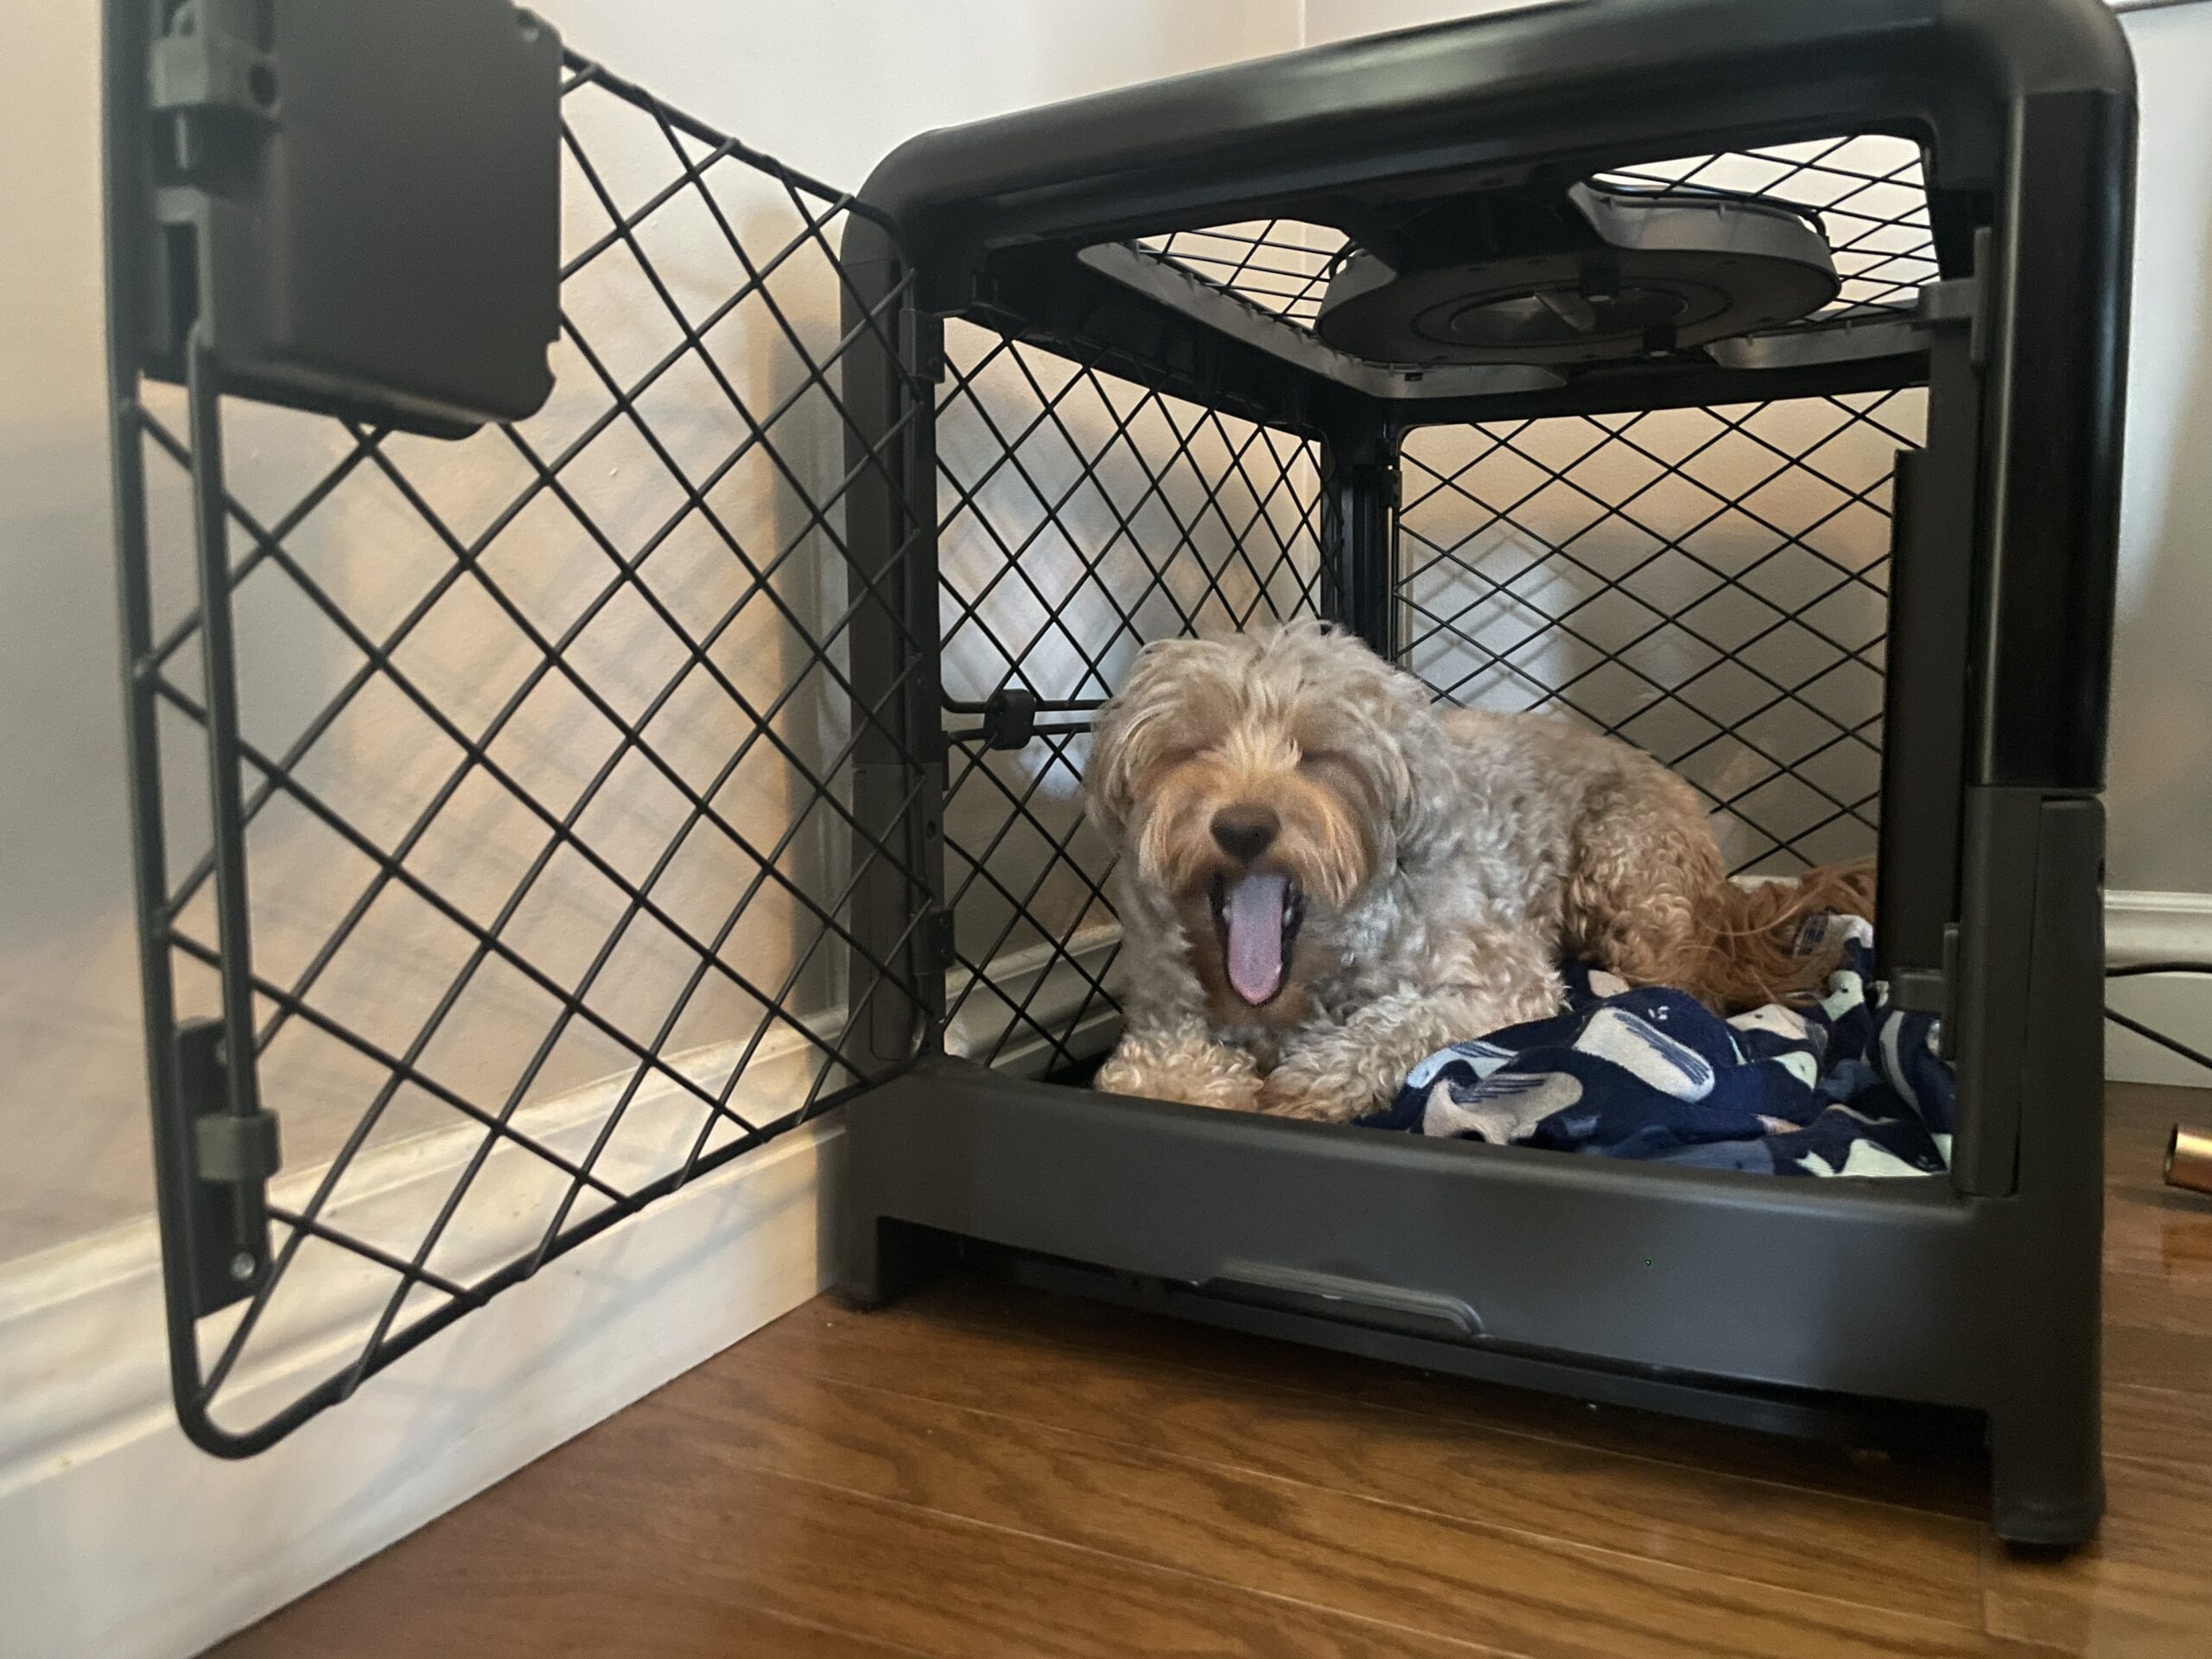 Dog crate comparison guide. What’s the best dog crate?